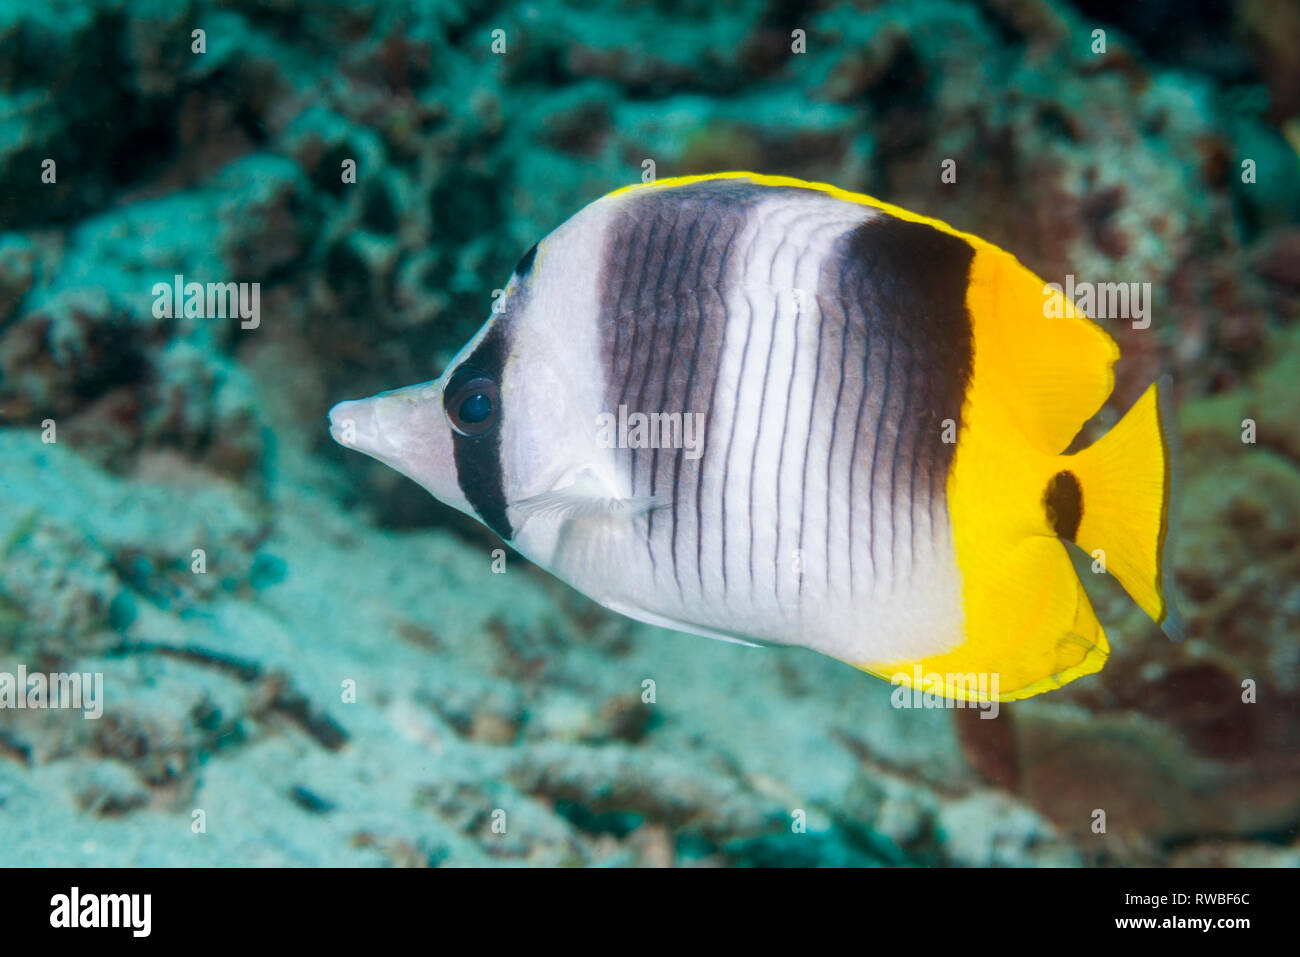 Pacific double-saddle butterflyfish or False Furcula butterflyfish [Chaetodon ulietensis].  North Sulawesi, Indonesia.  Central Indo-Pacific. Stock Photo